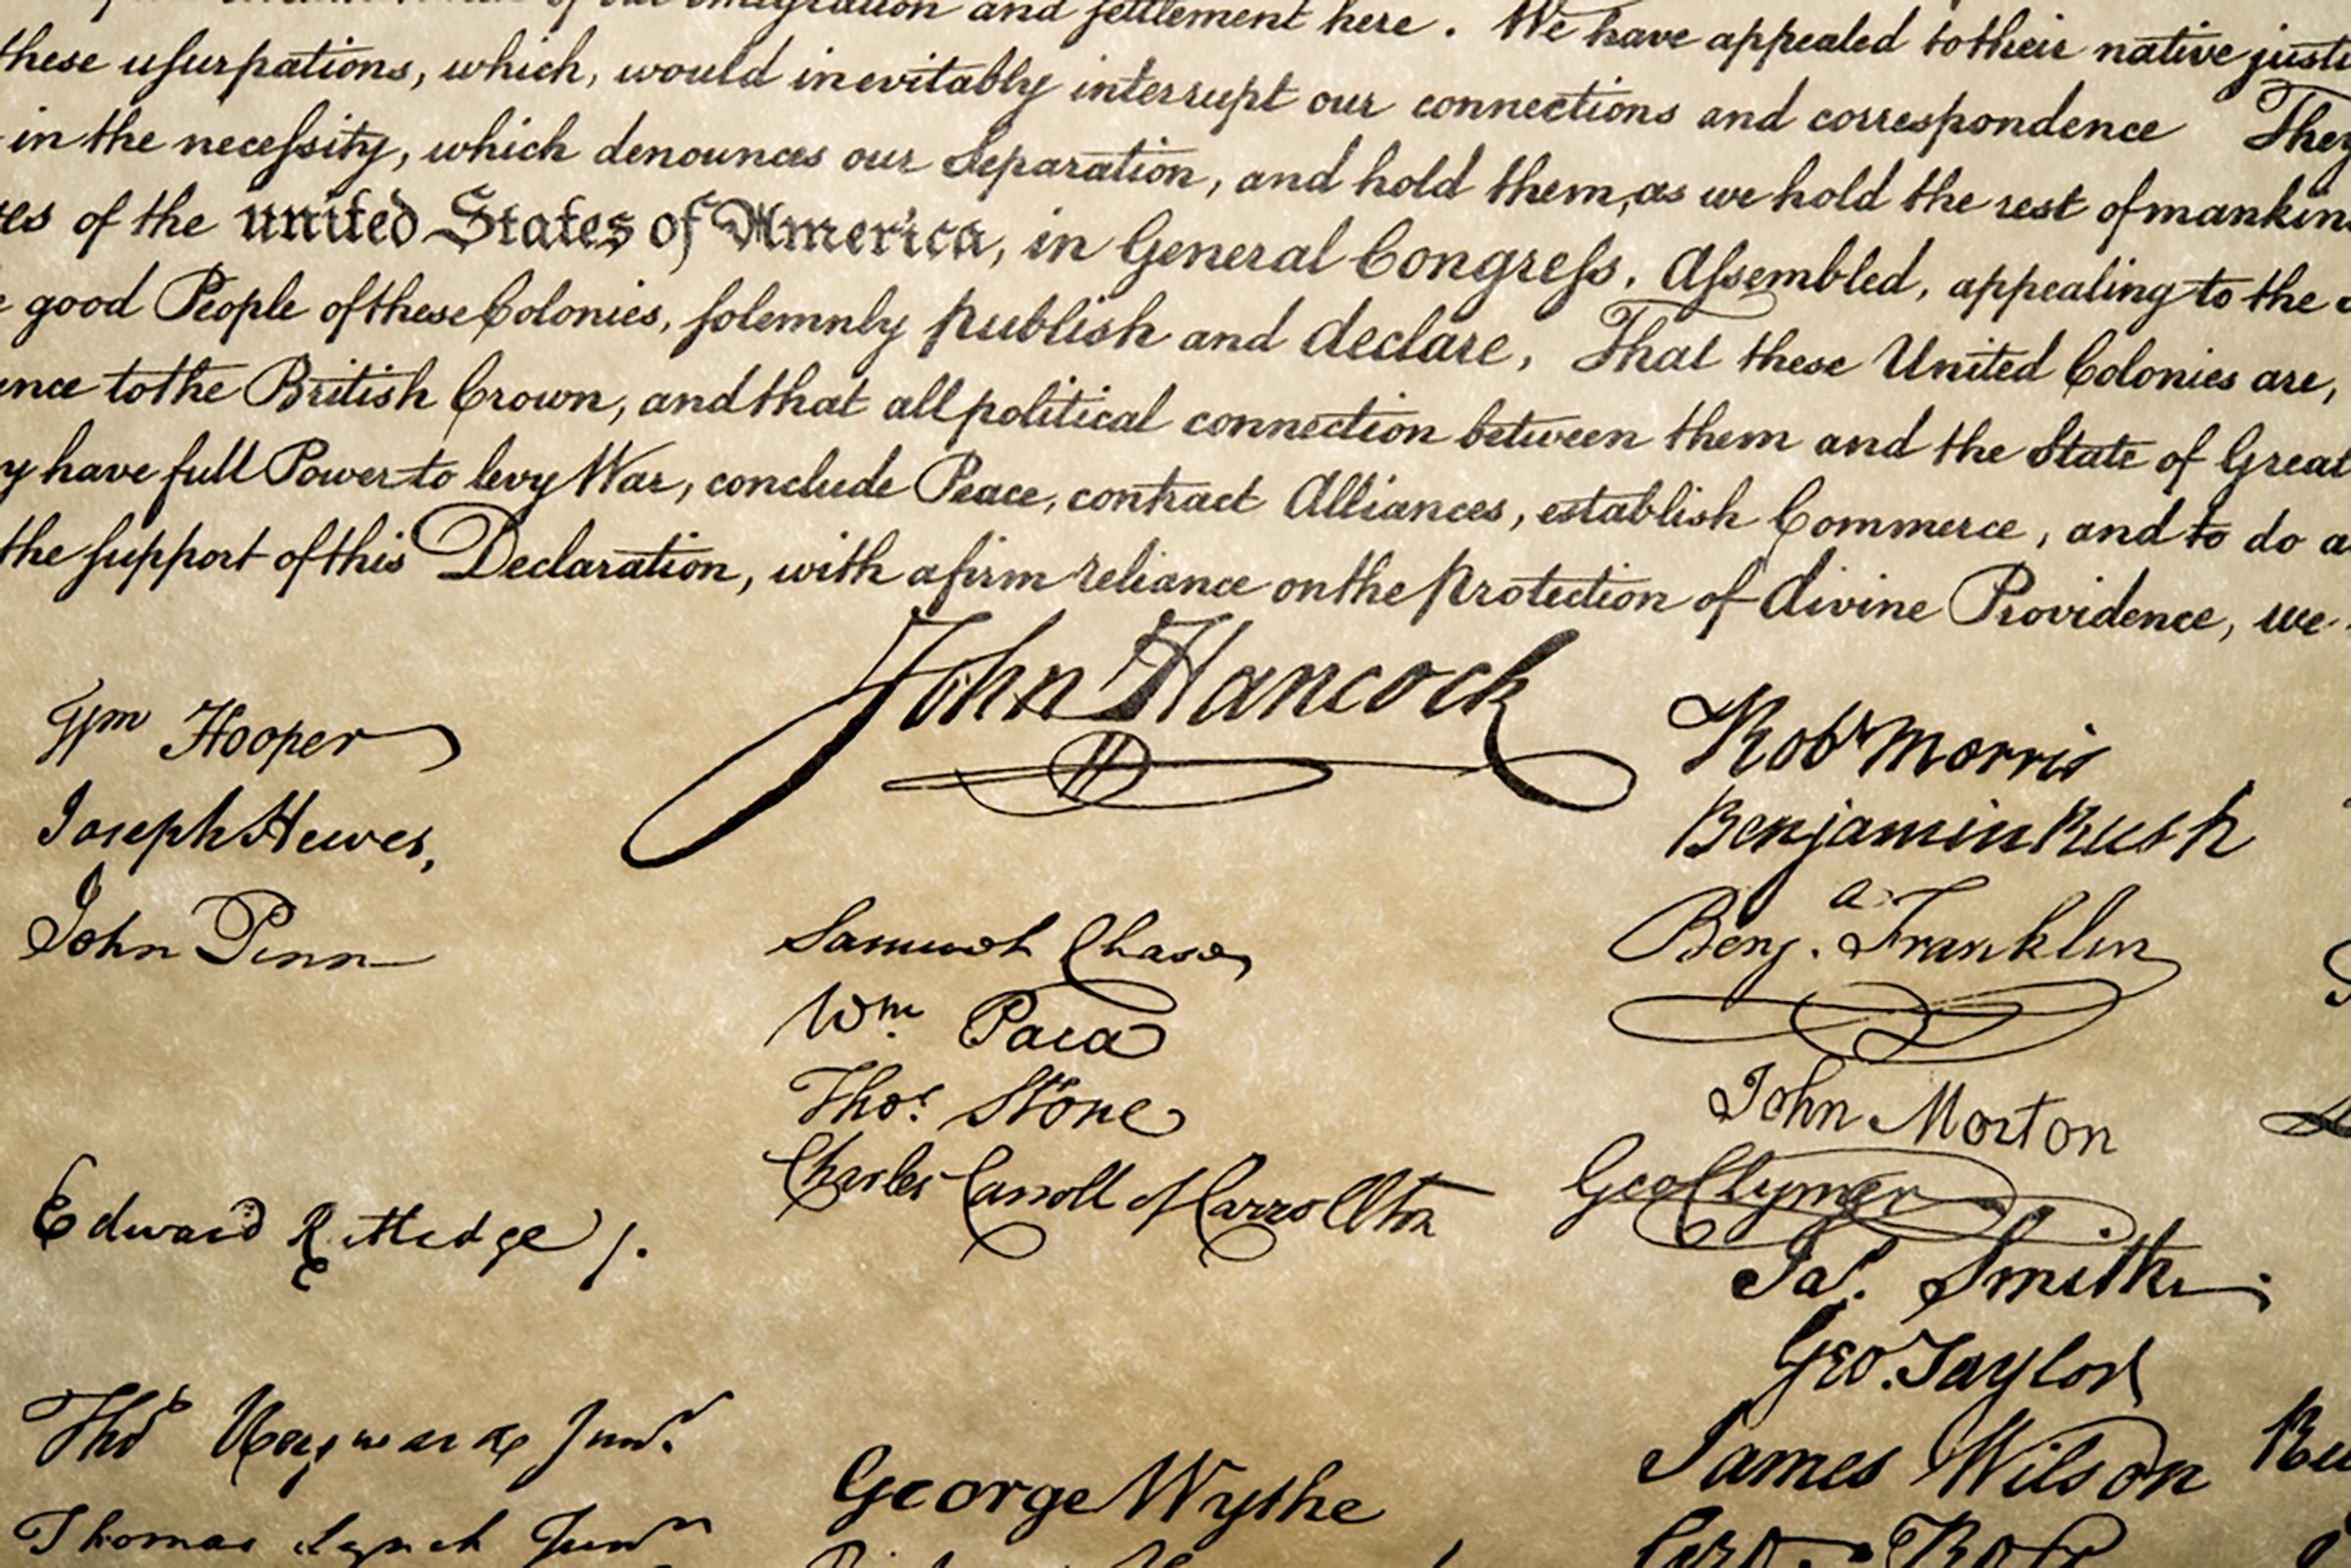 01_signatures_The-Most-Valuable-Signature-on-the-Declaration-of-Independence-Is-Not-Who-You-Thought-It-Was_445571968_Andrea-Izzotti.jpg